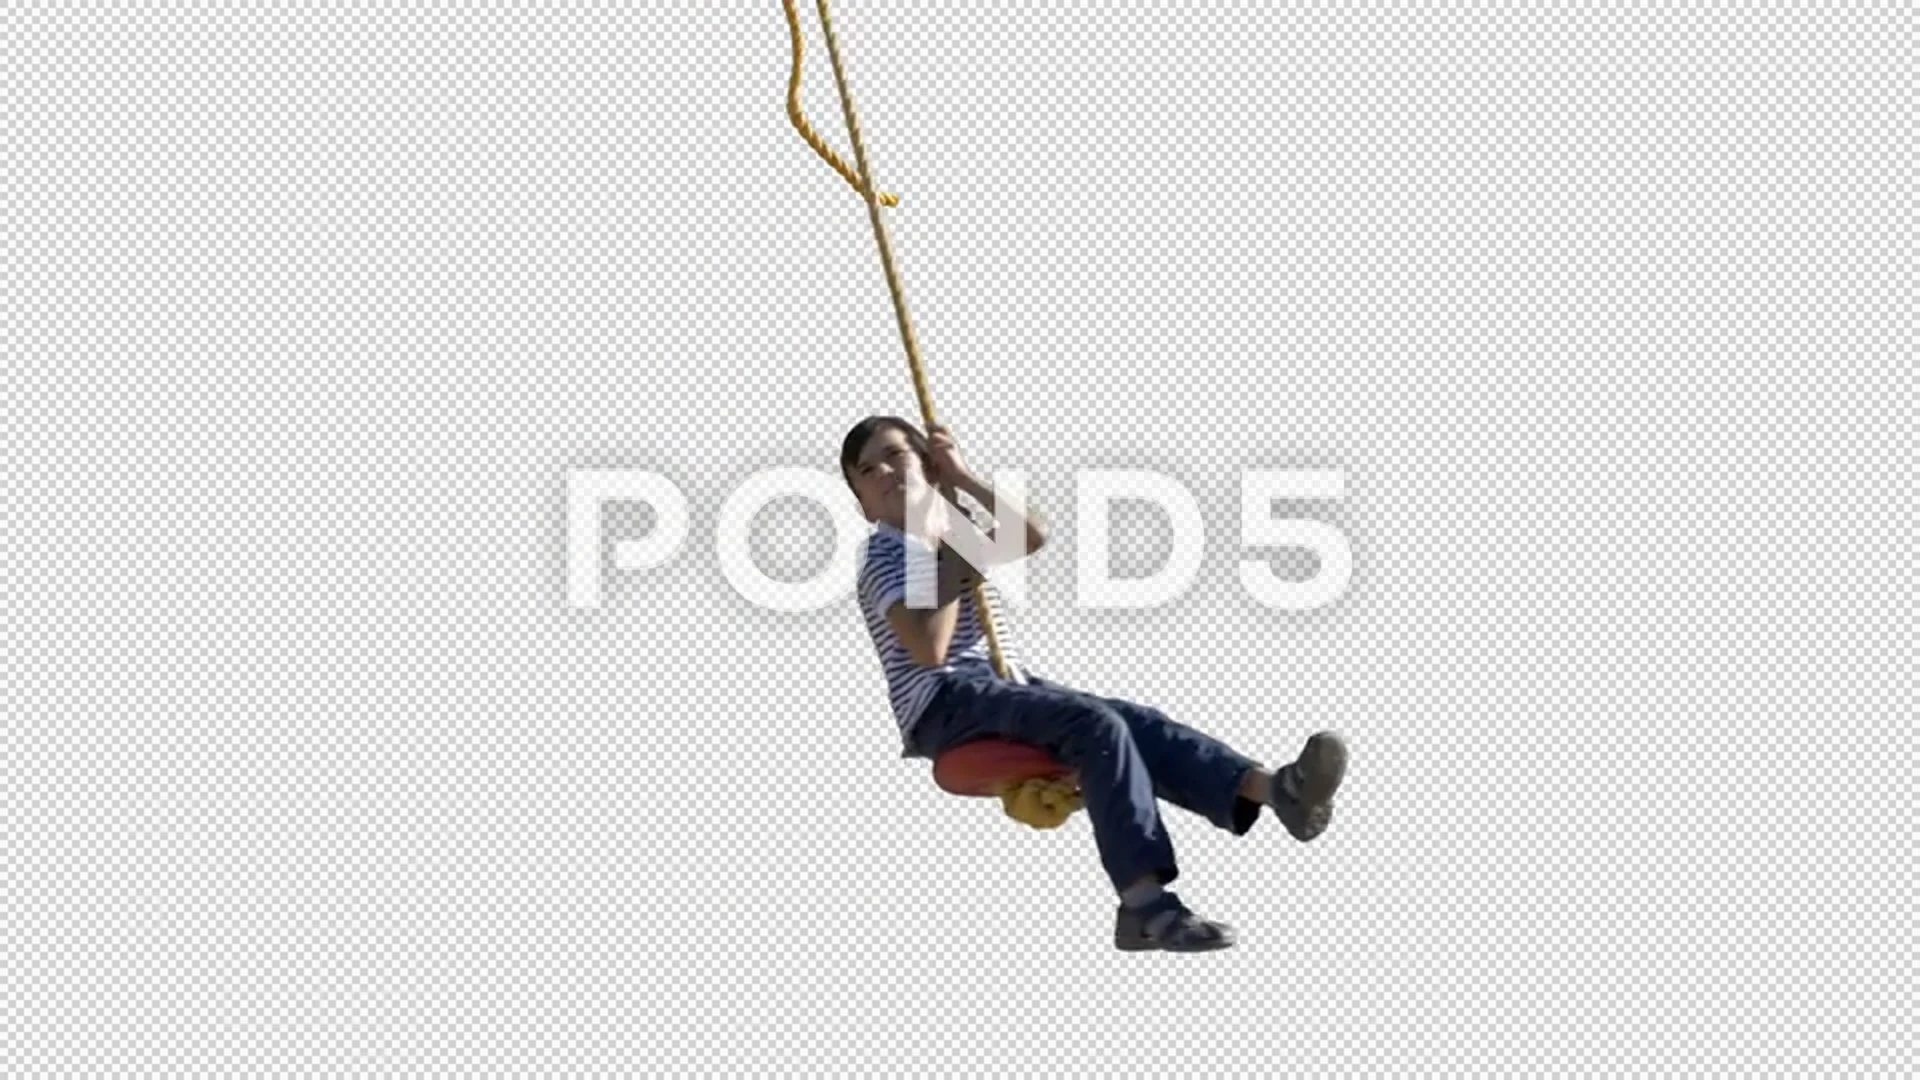 A small boy swings on a rope. Transparen, Stock Video